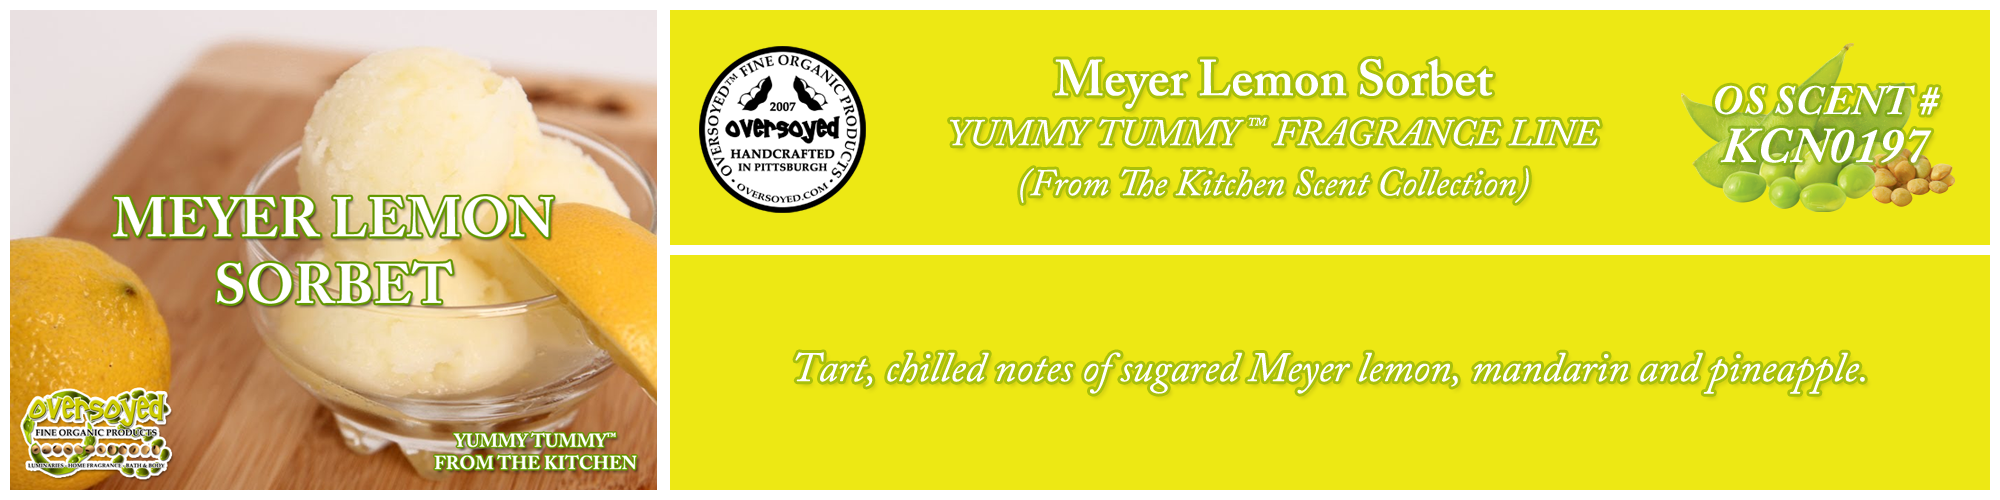 Meyer Lemon Sorbet Handcrafted Products Collection